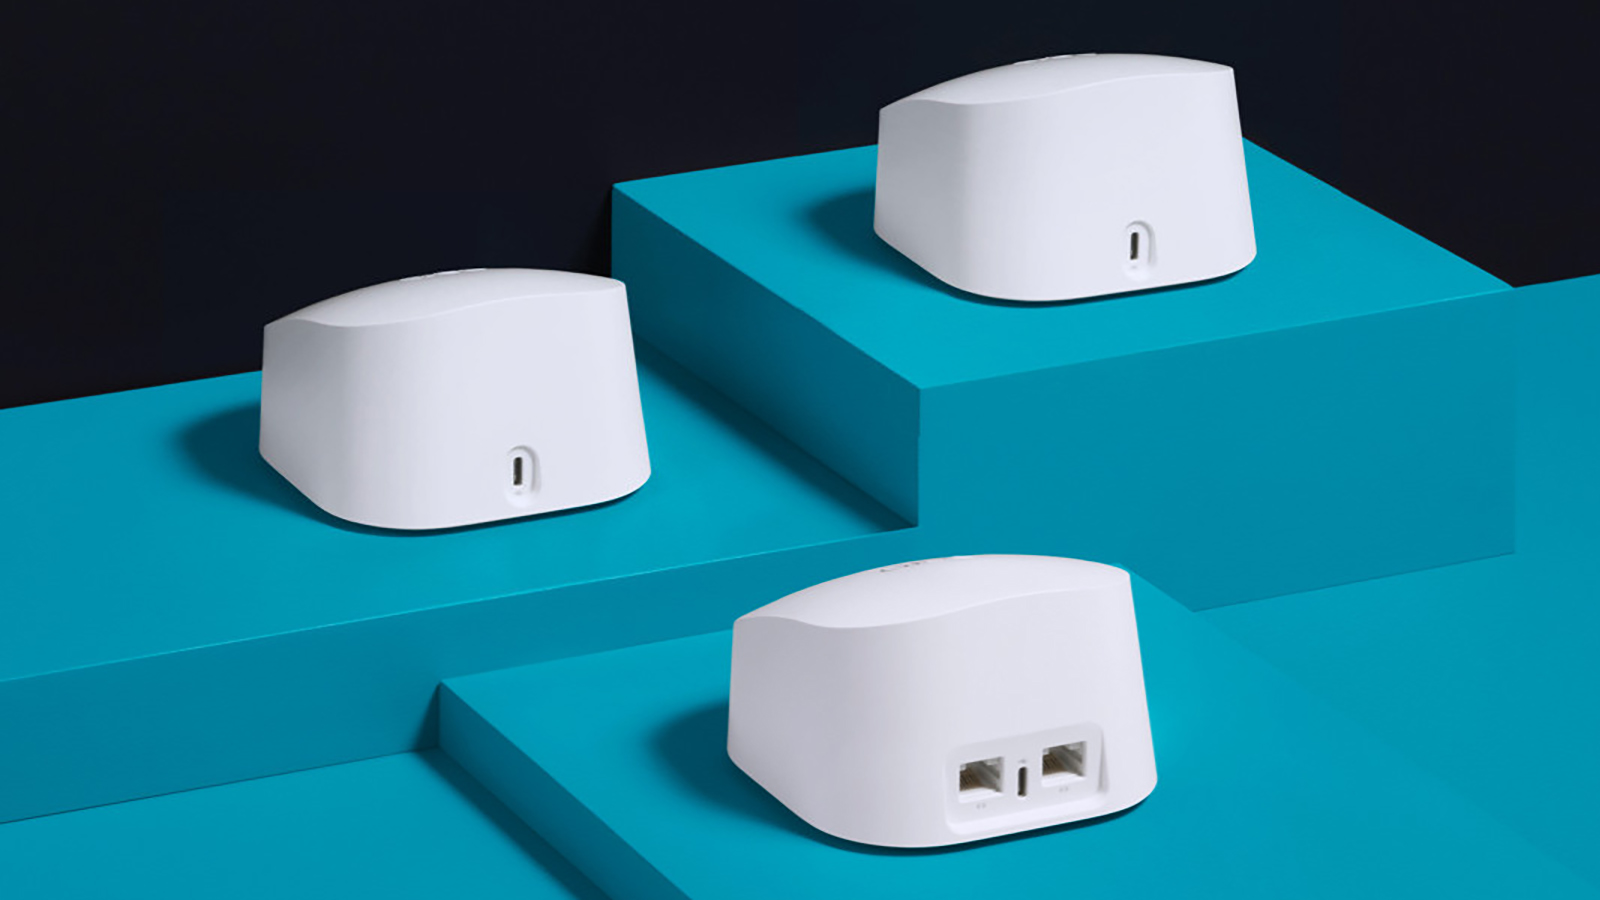 The Eero 6+ mesh Wi-Fi system is on sale today